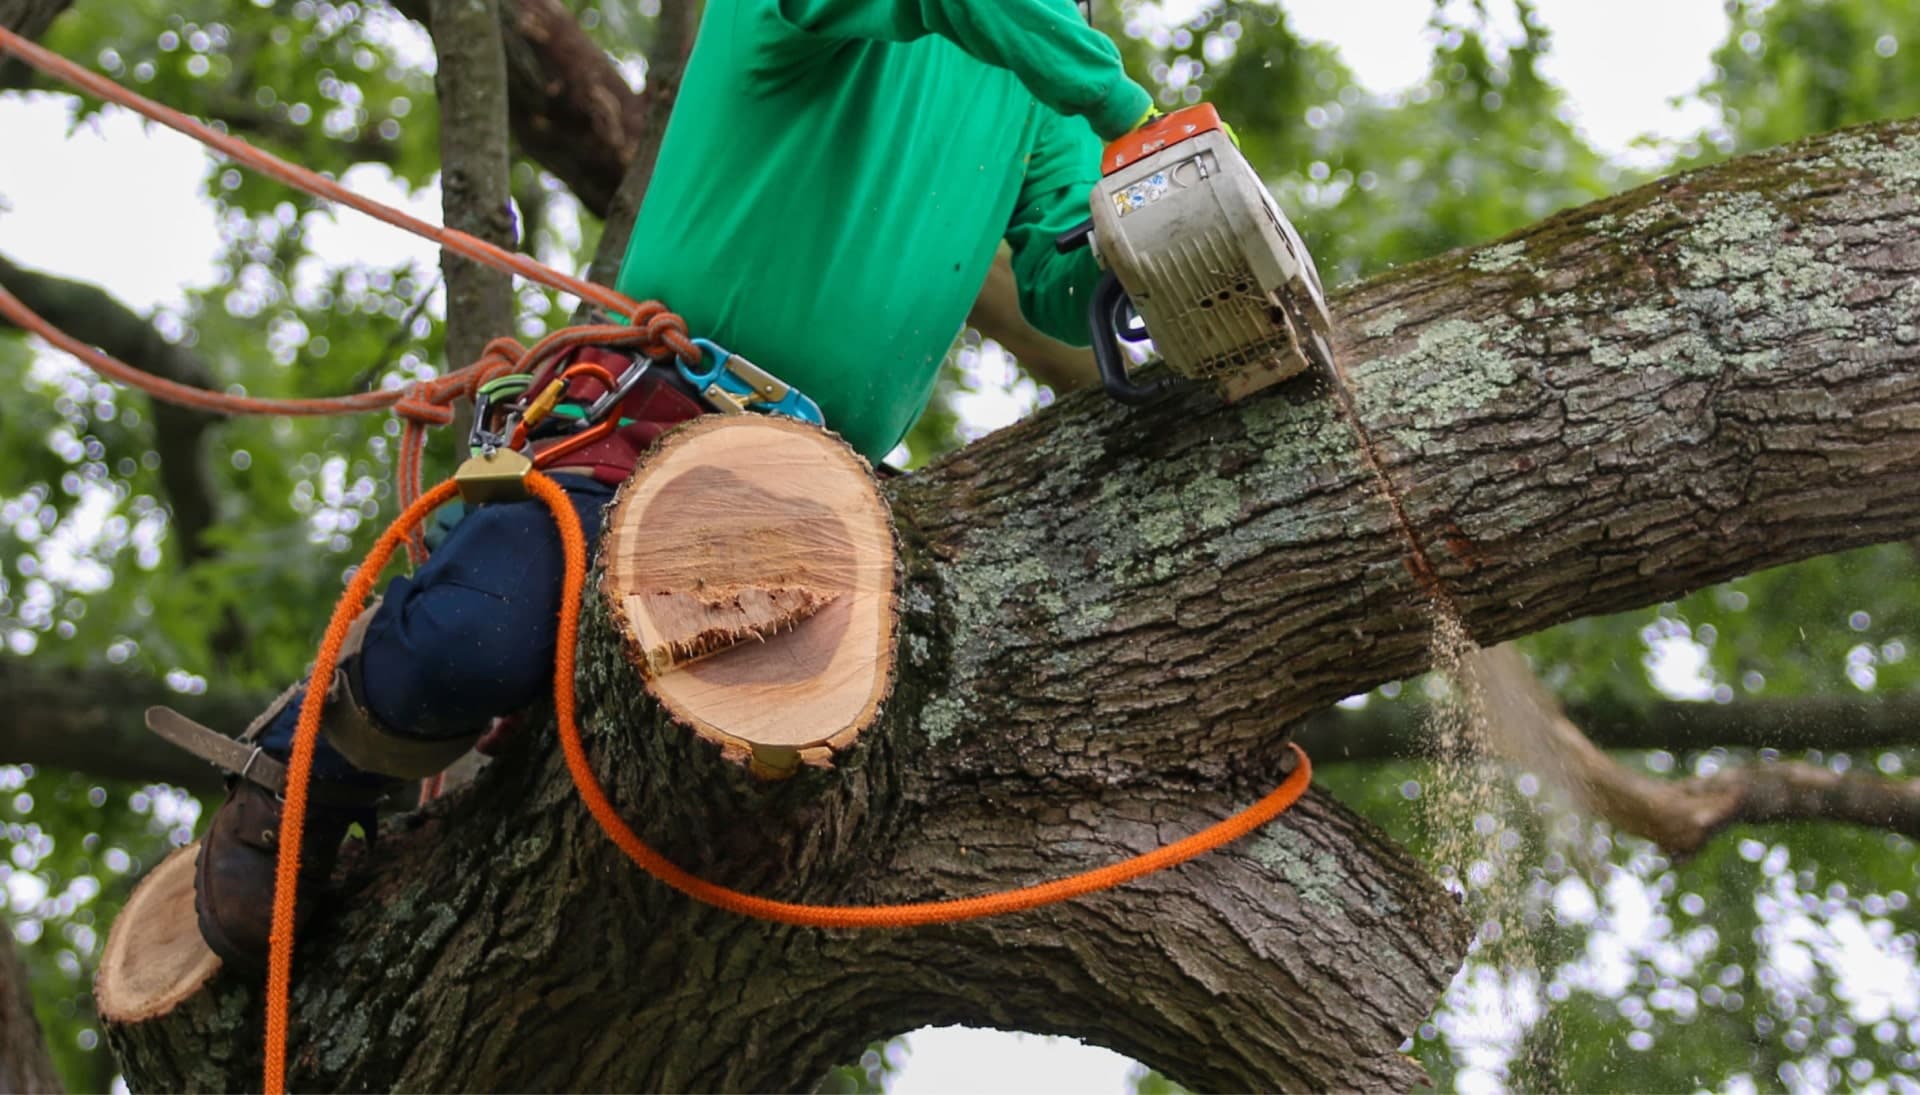 Shed your worries away with best tree removal in Lynchburg